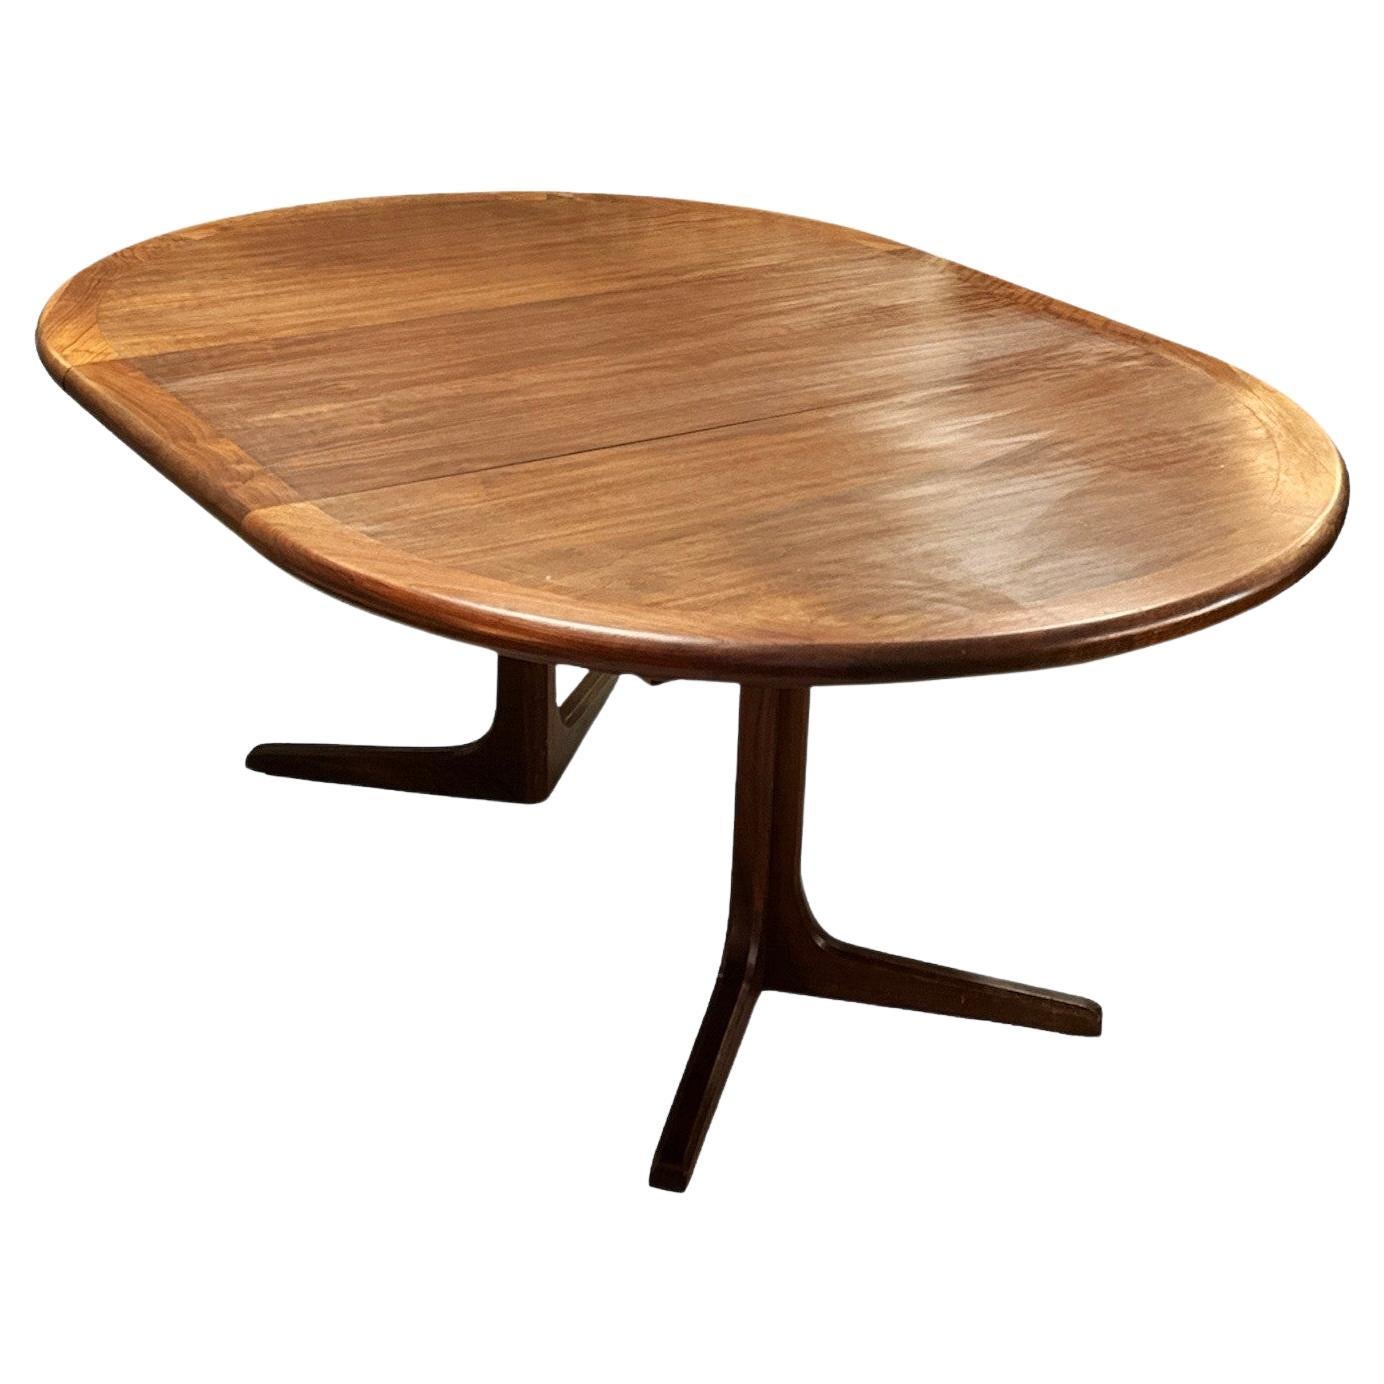 Mid Century Rose Wood Dinning Tales By Glen Of California. Wonderful Wooden table with three extra leaves that expand this table up to 107 inches in width. Beautiful Rose wood with spectacular grain. 
When no leaves are attached it forms a circular